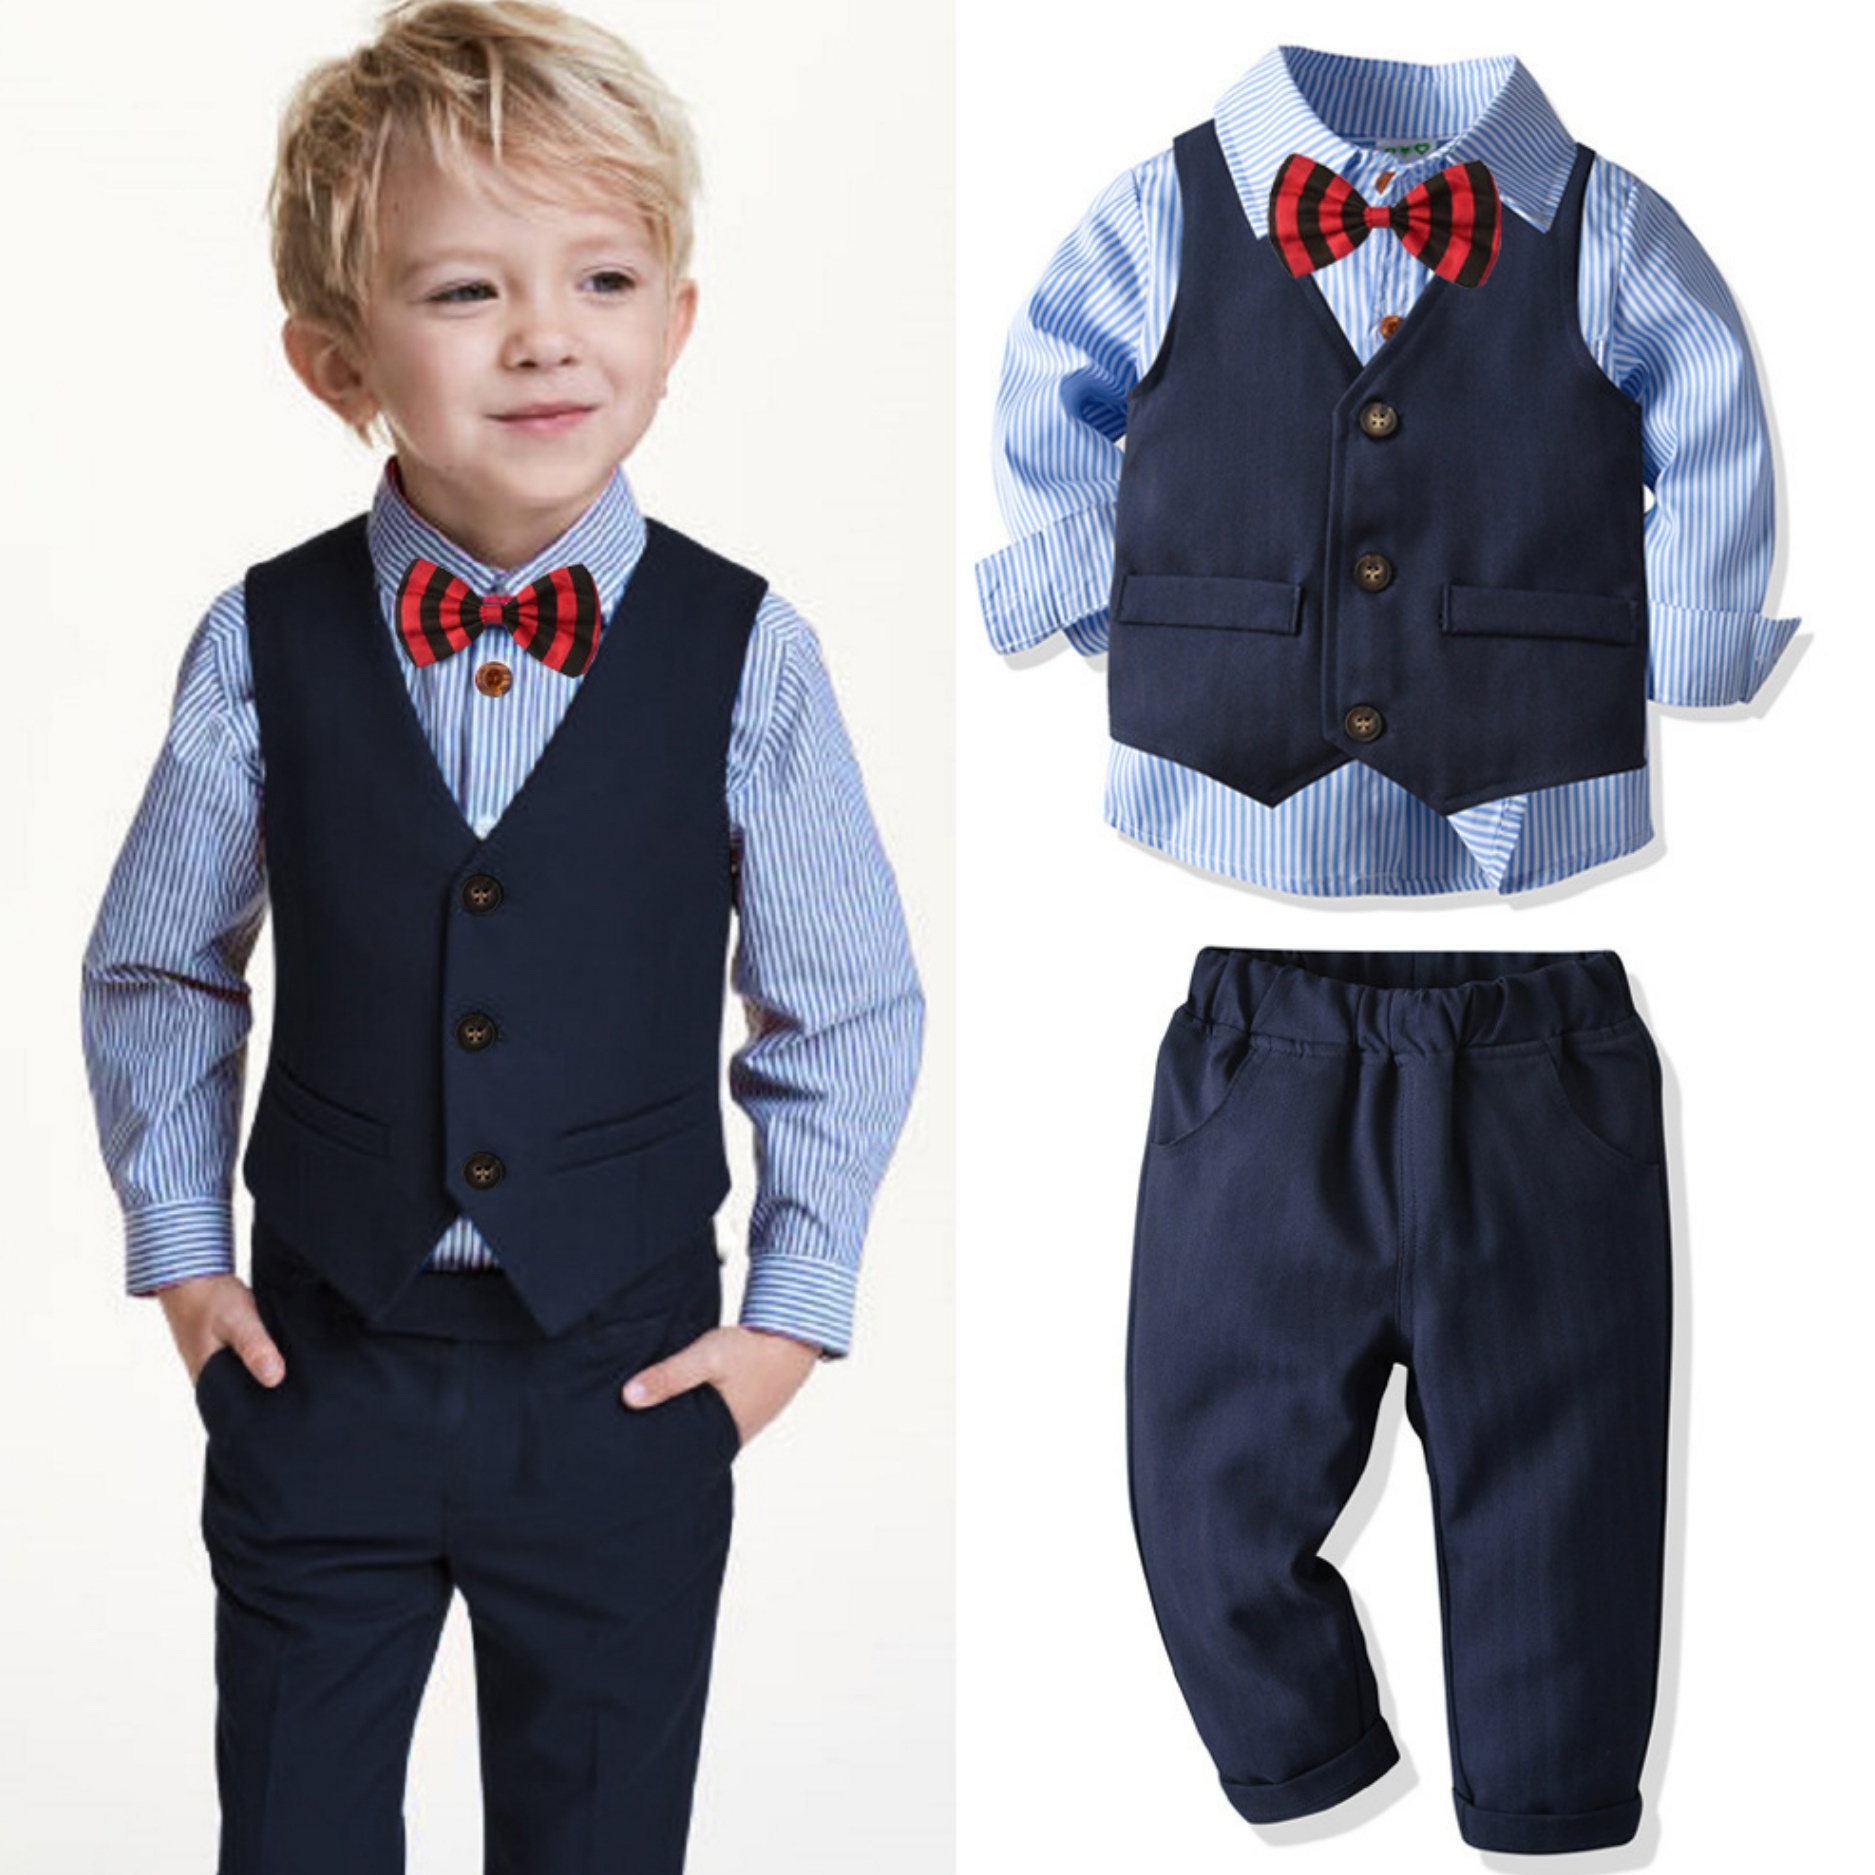 

Boys Gentleman Suit Set, Striped Cotton Long Sleeve Shirt With Bow Tie, Waistcoat & Long Pants, Party Birthday Pageboy Outfit, Formal Attire